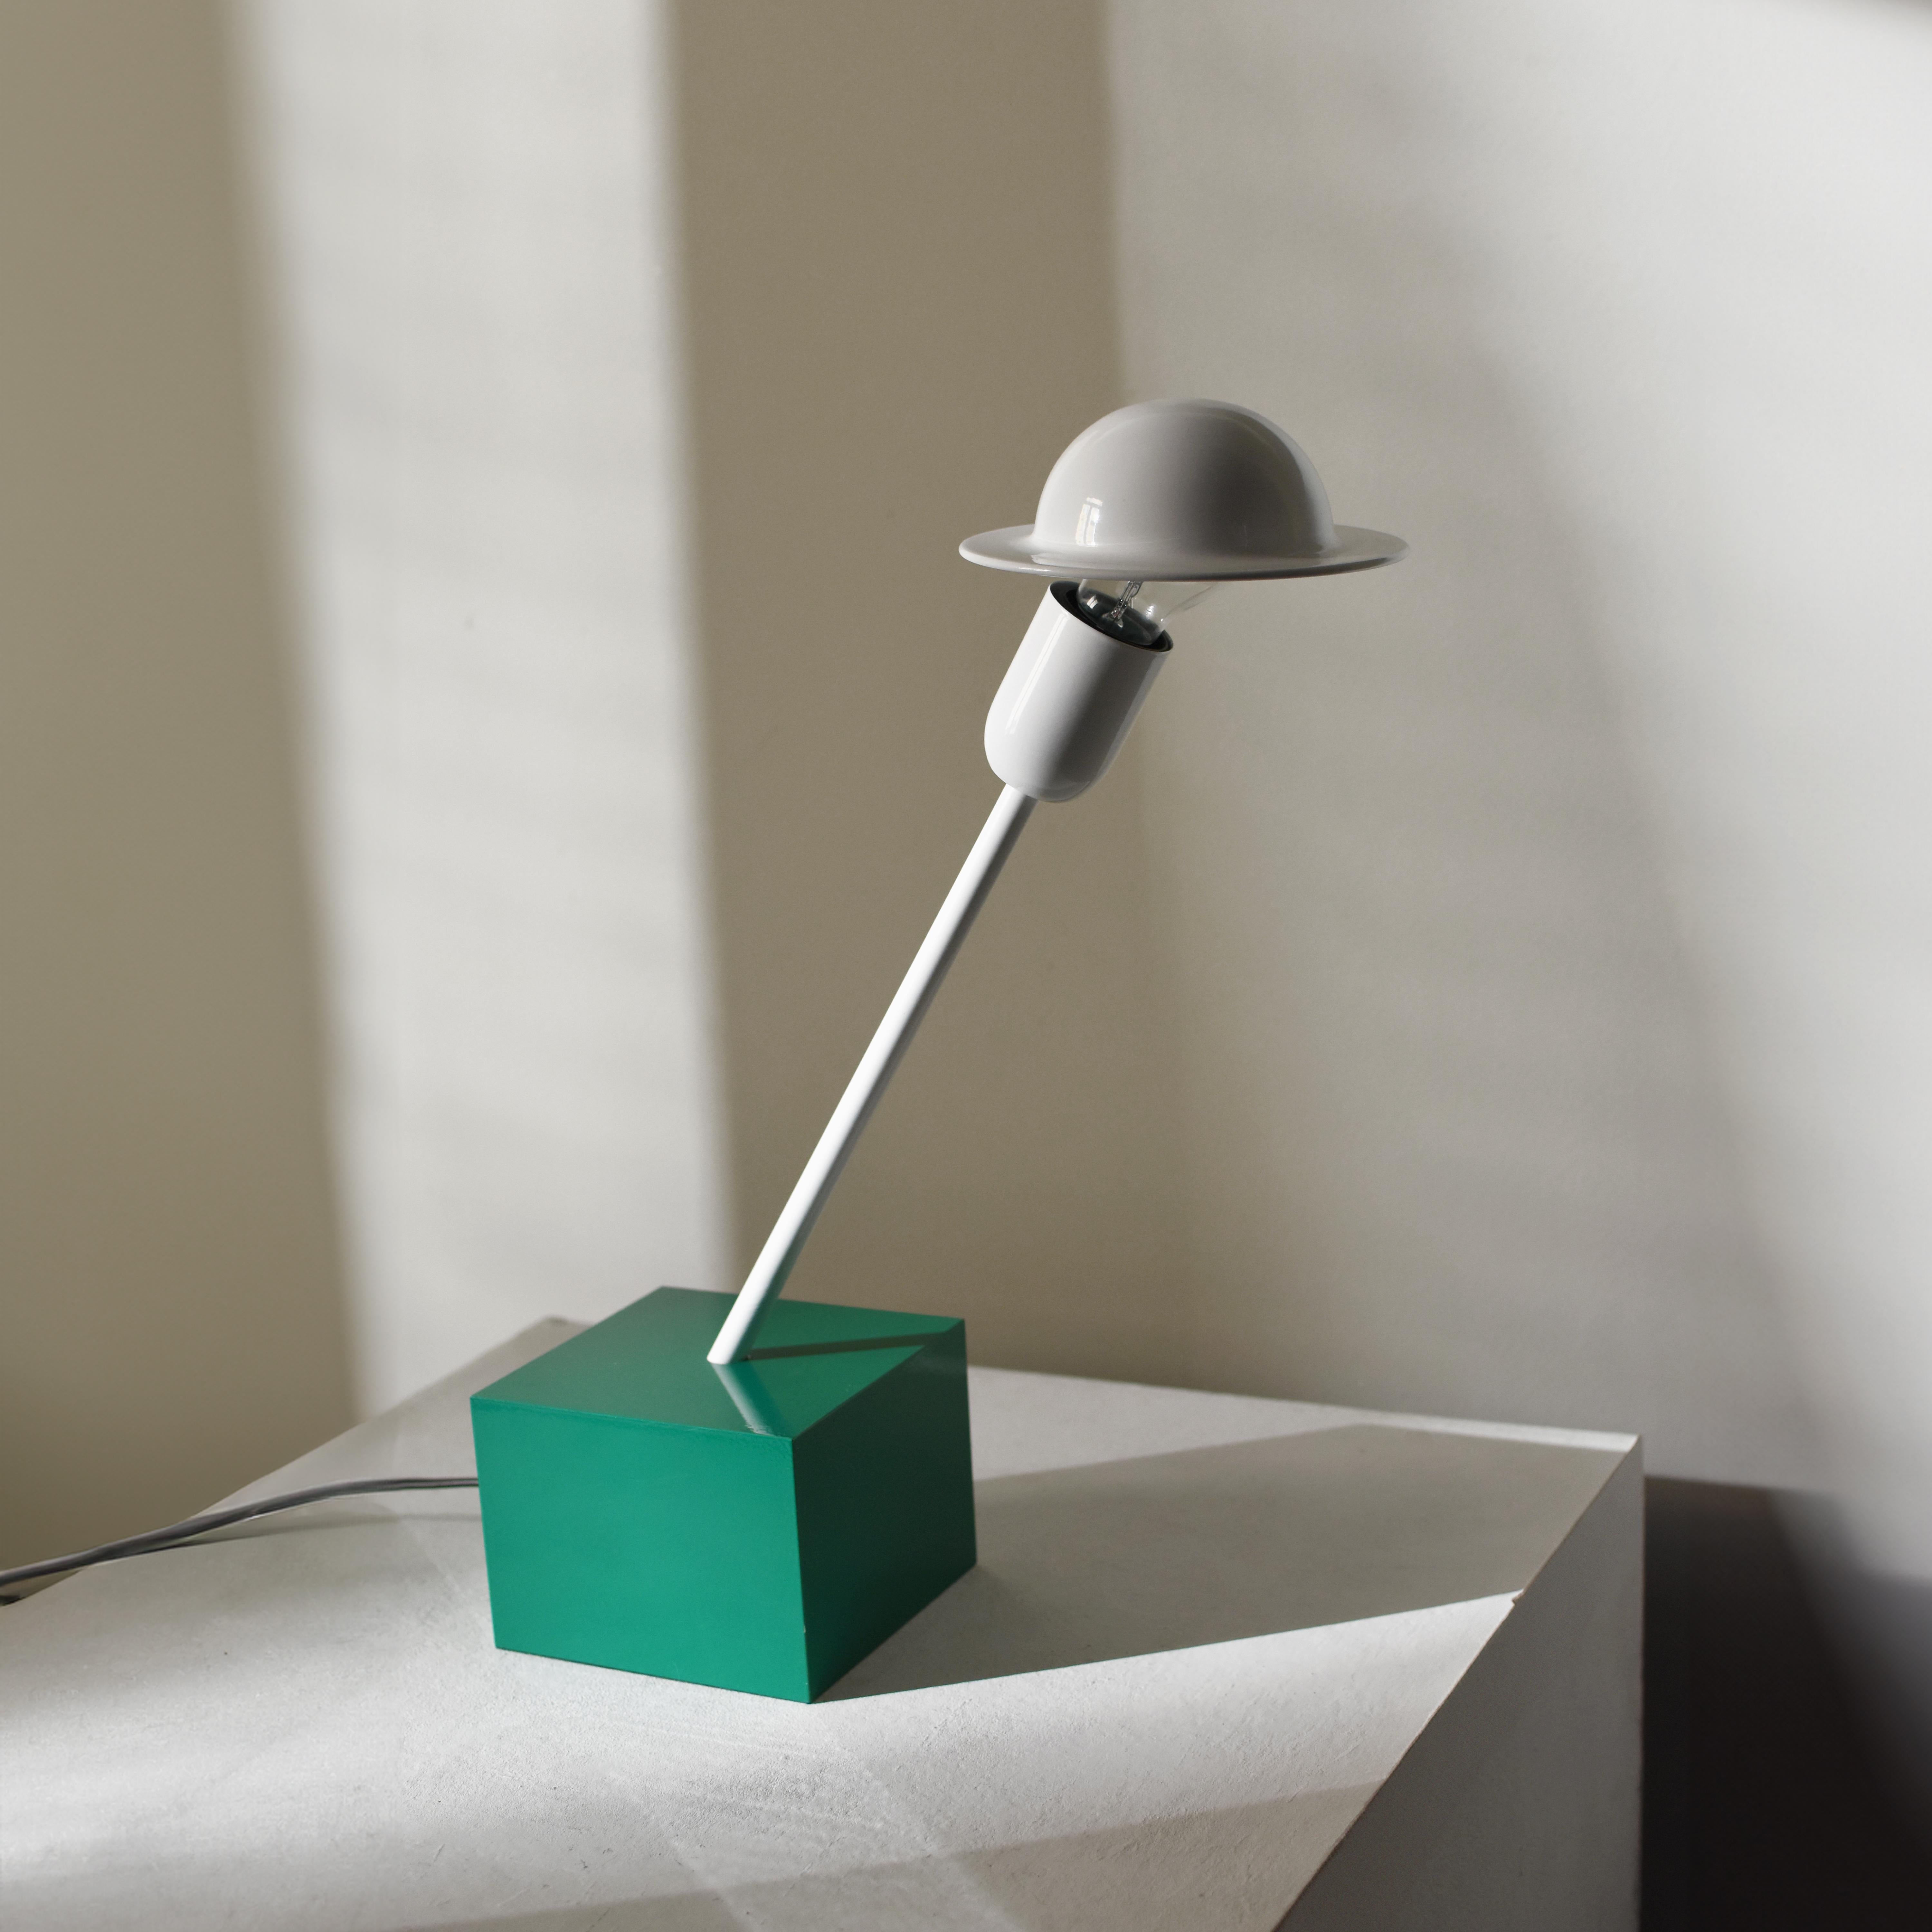 The table lamp 